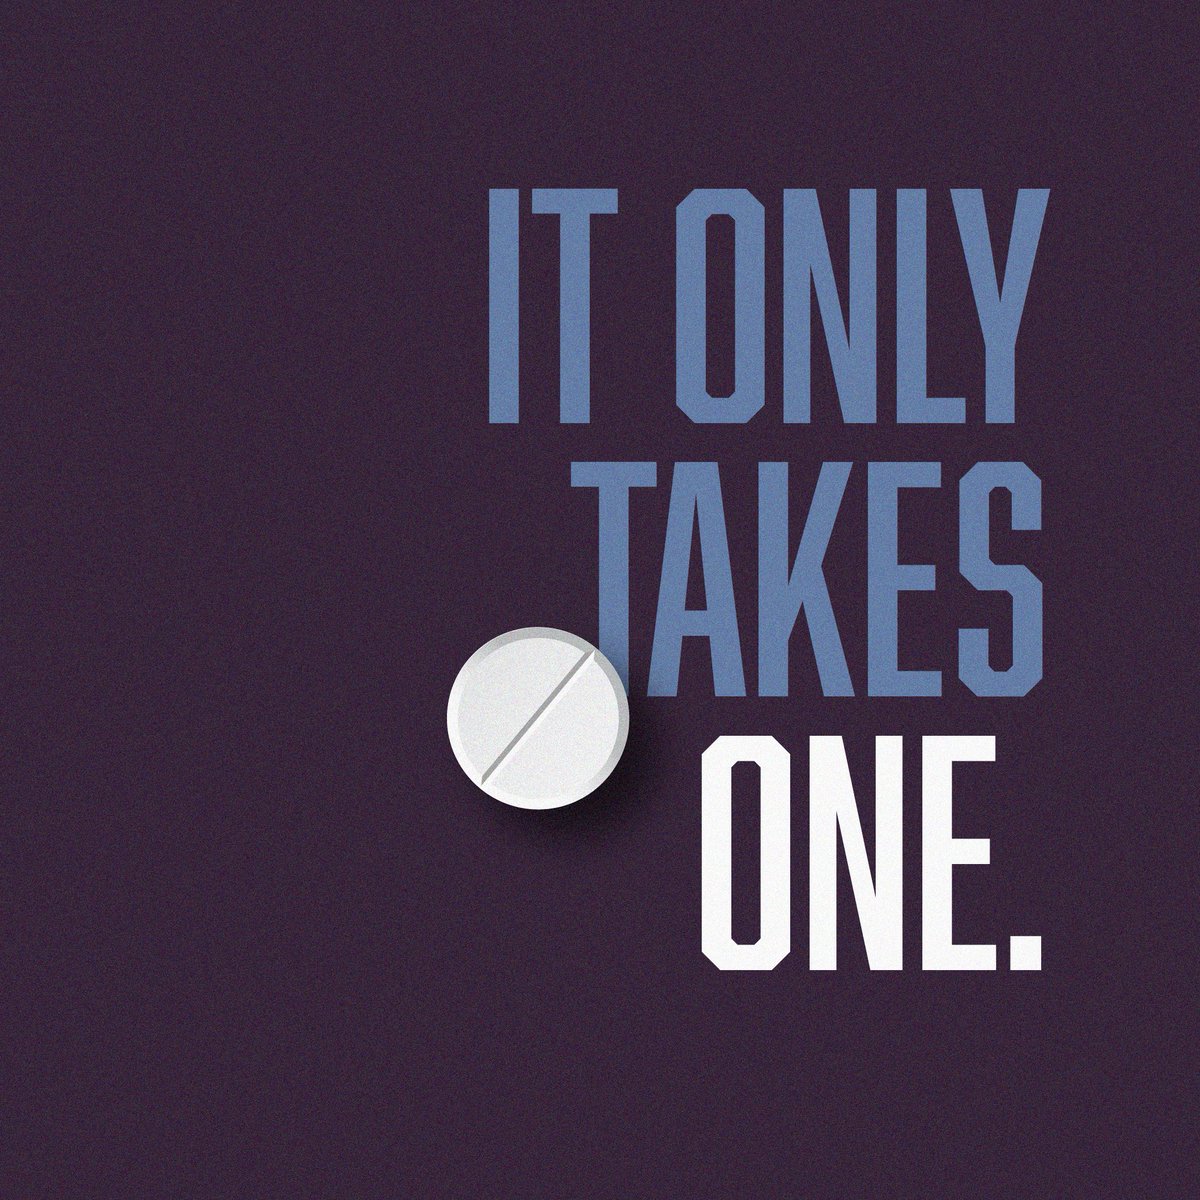 It takes one mistake. Discuss the dangers of fentanyl to protect your child from becoming a statistic in Virginia. Even the most responsible youth are at risk! Visit our website to learn more: bit.ly/48QqYBz